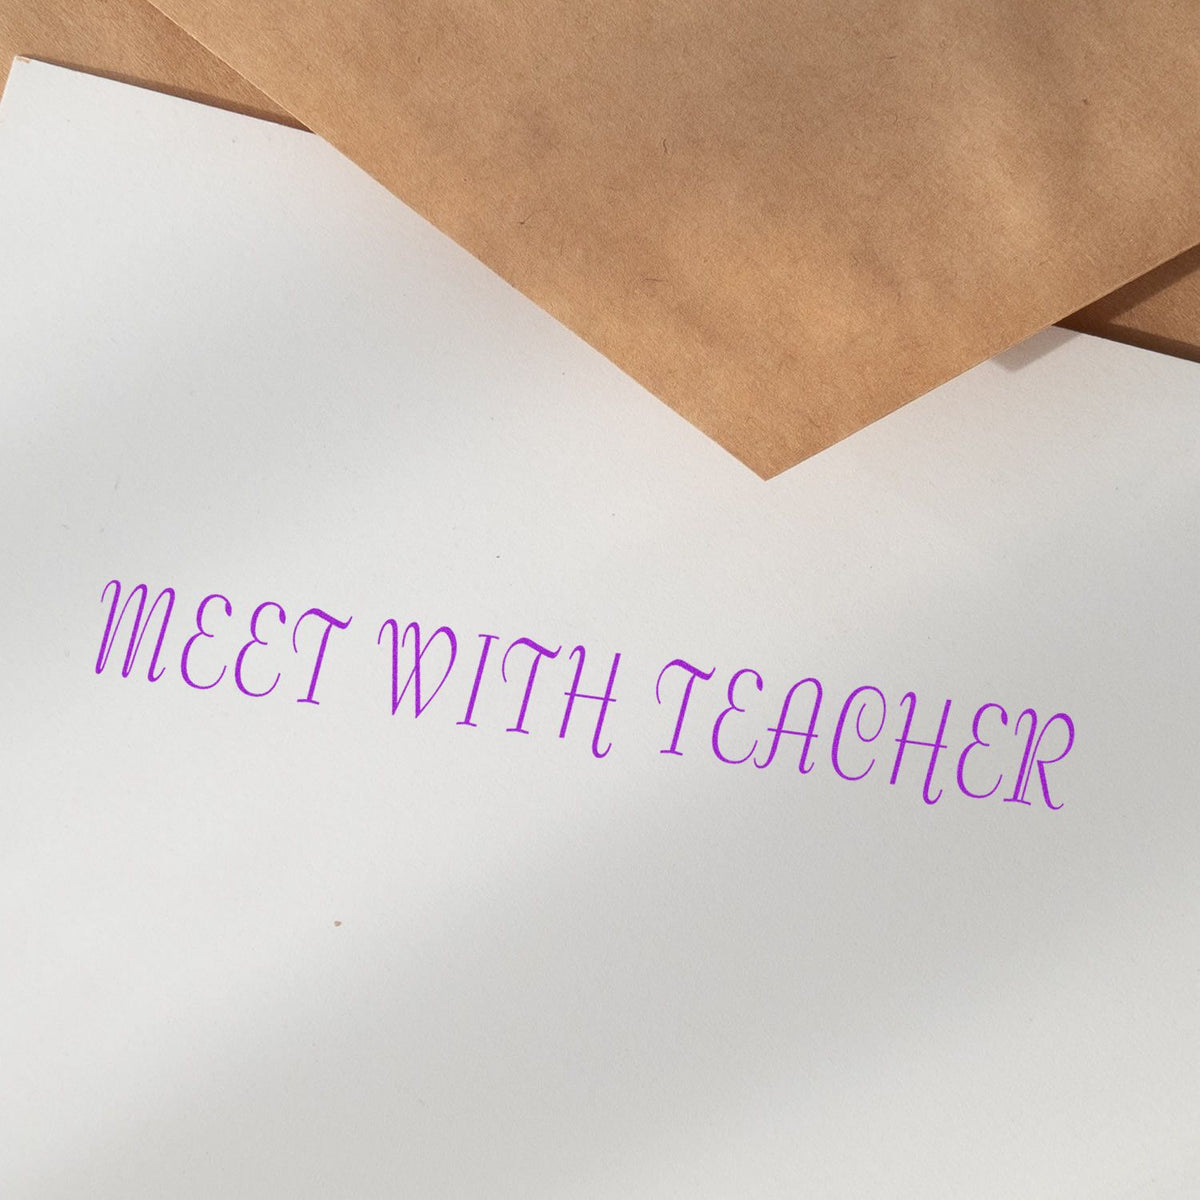 Large Meet With Teacher Rubber Stamp In Use